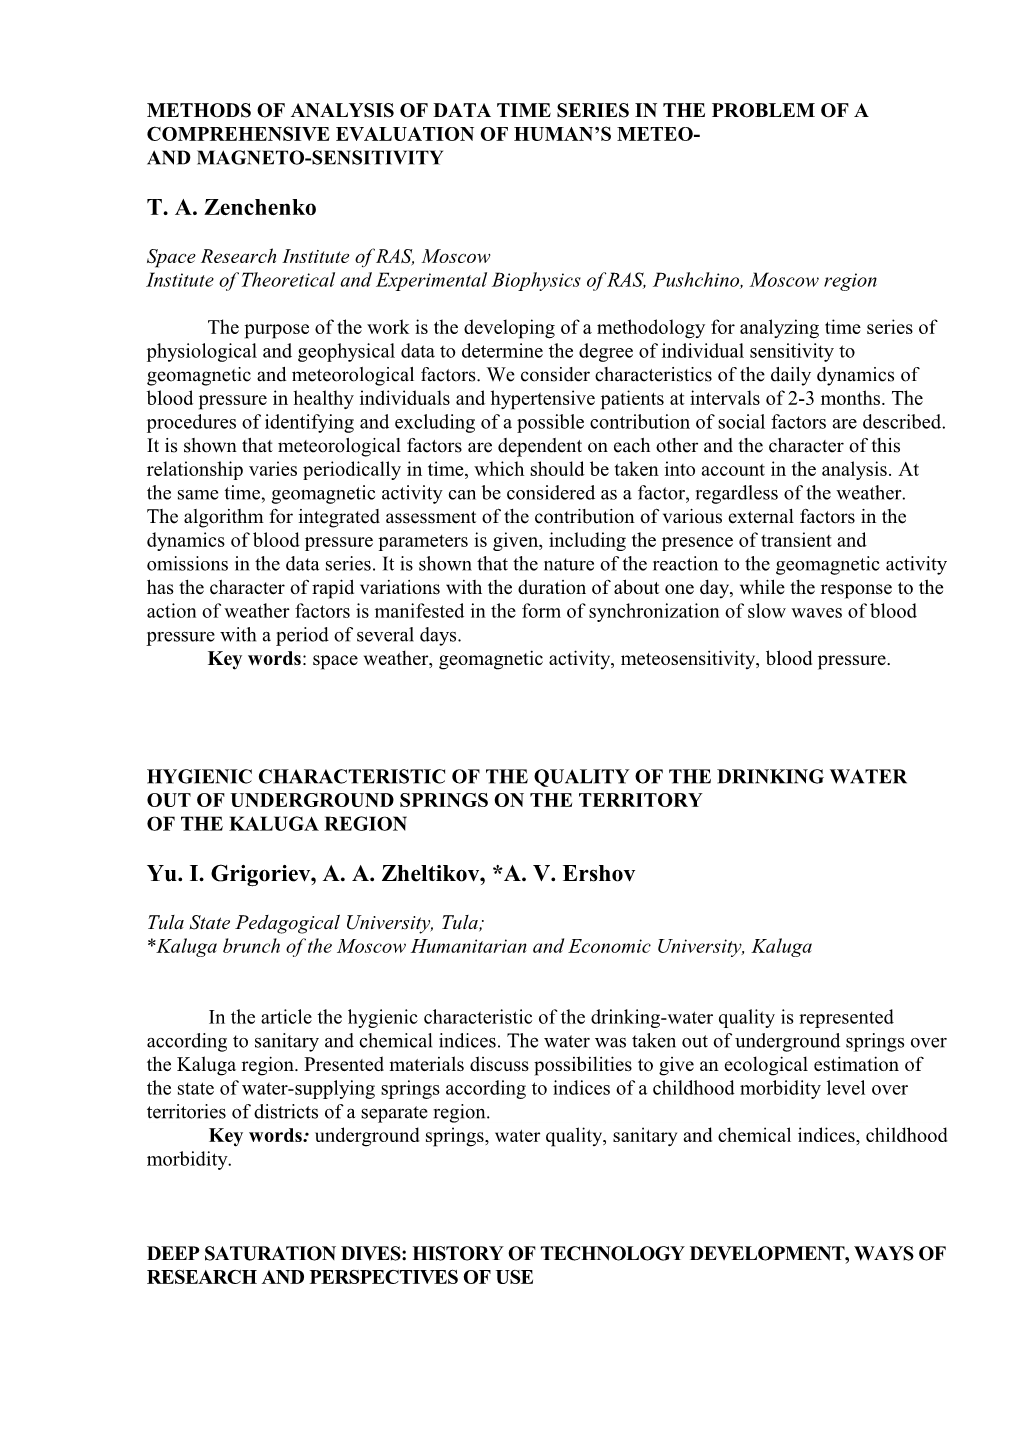 Methods of Analysis of Data Time Series in the Problem of a Comprehensive Evaluation Of